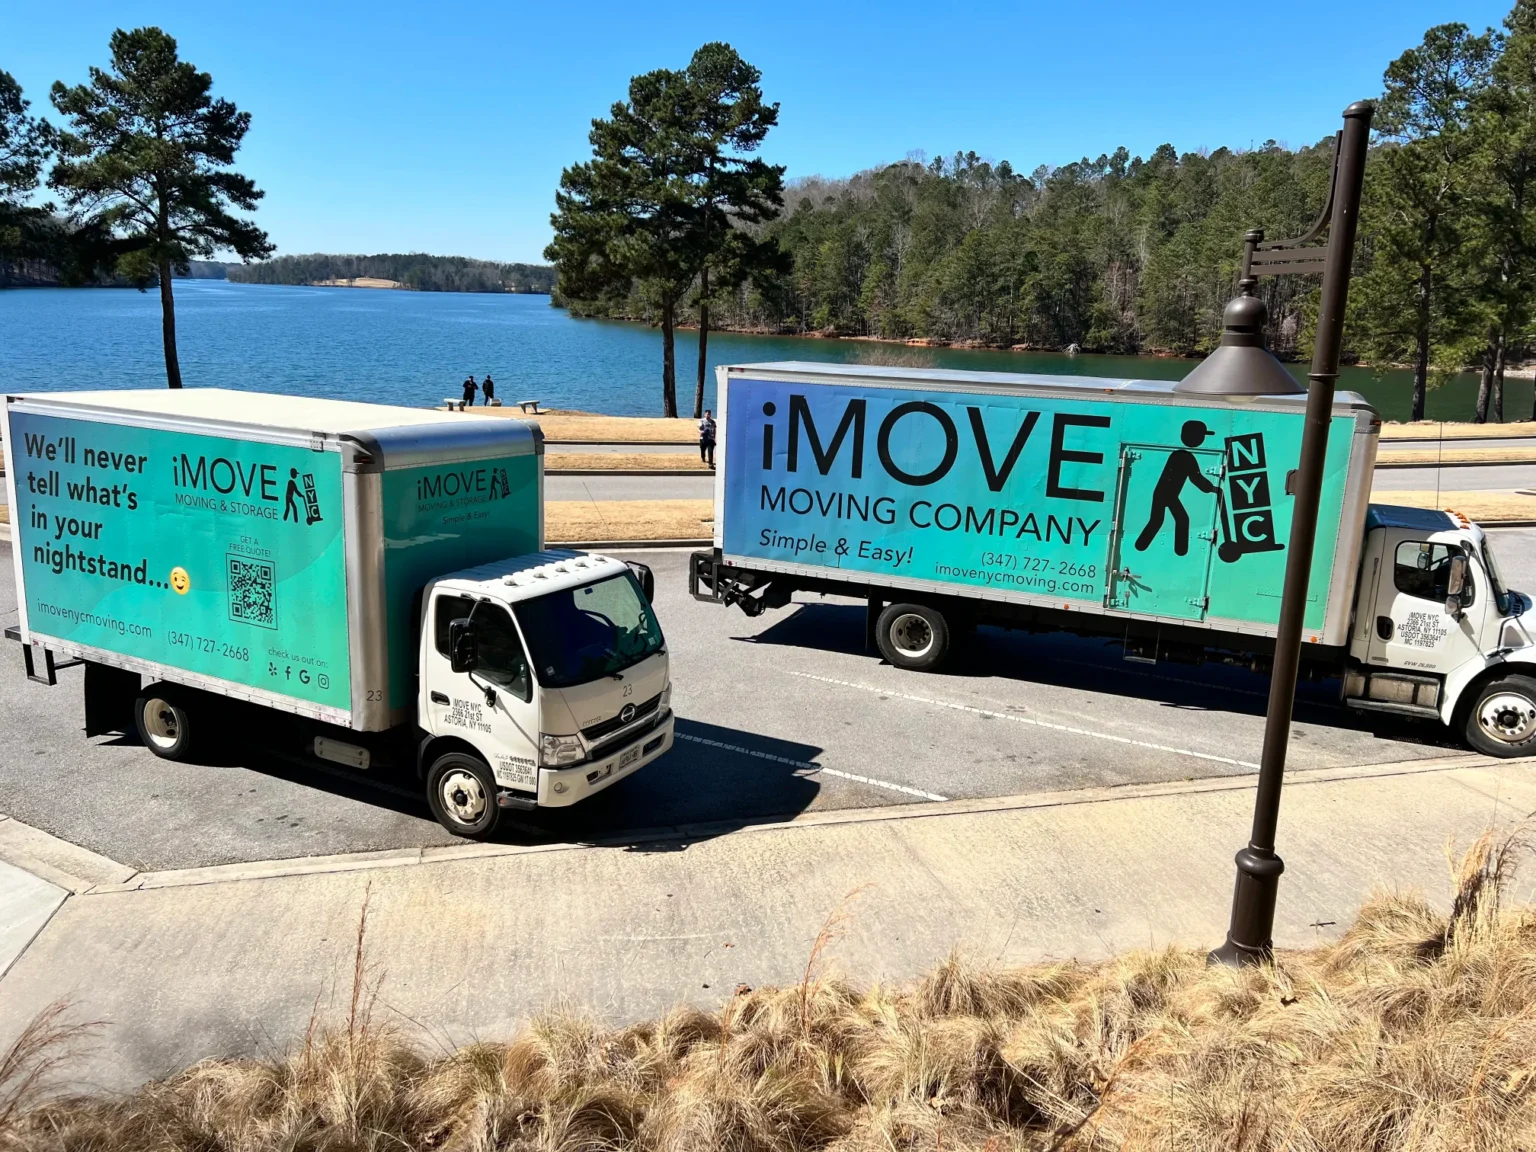 Two Turquoise iMOVE NYC Trucks Parked in Front of Beautiful Lake on a Sunny Day